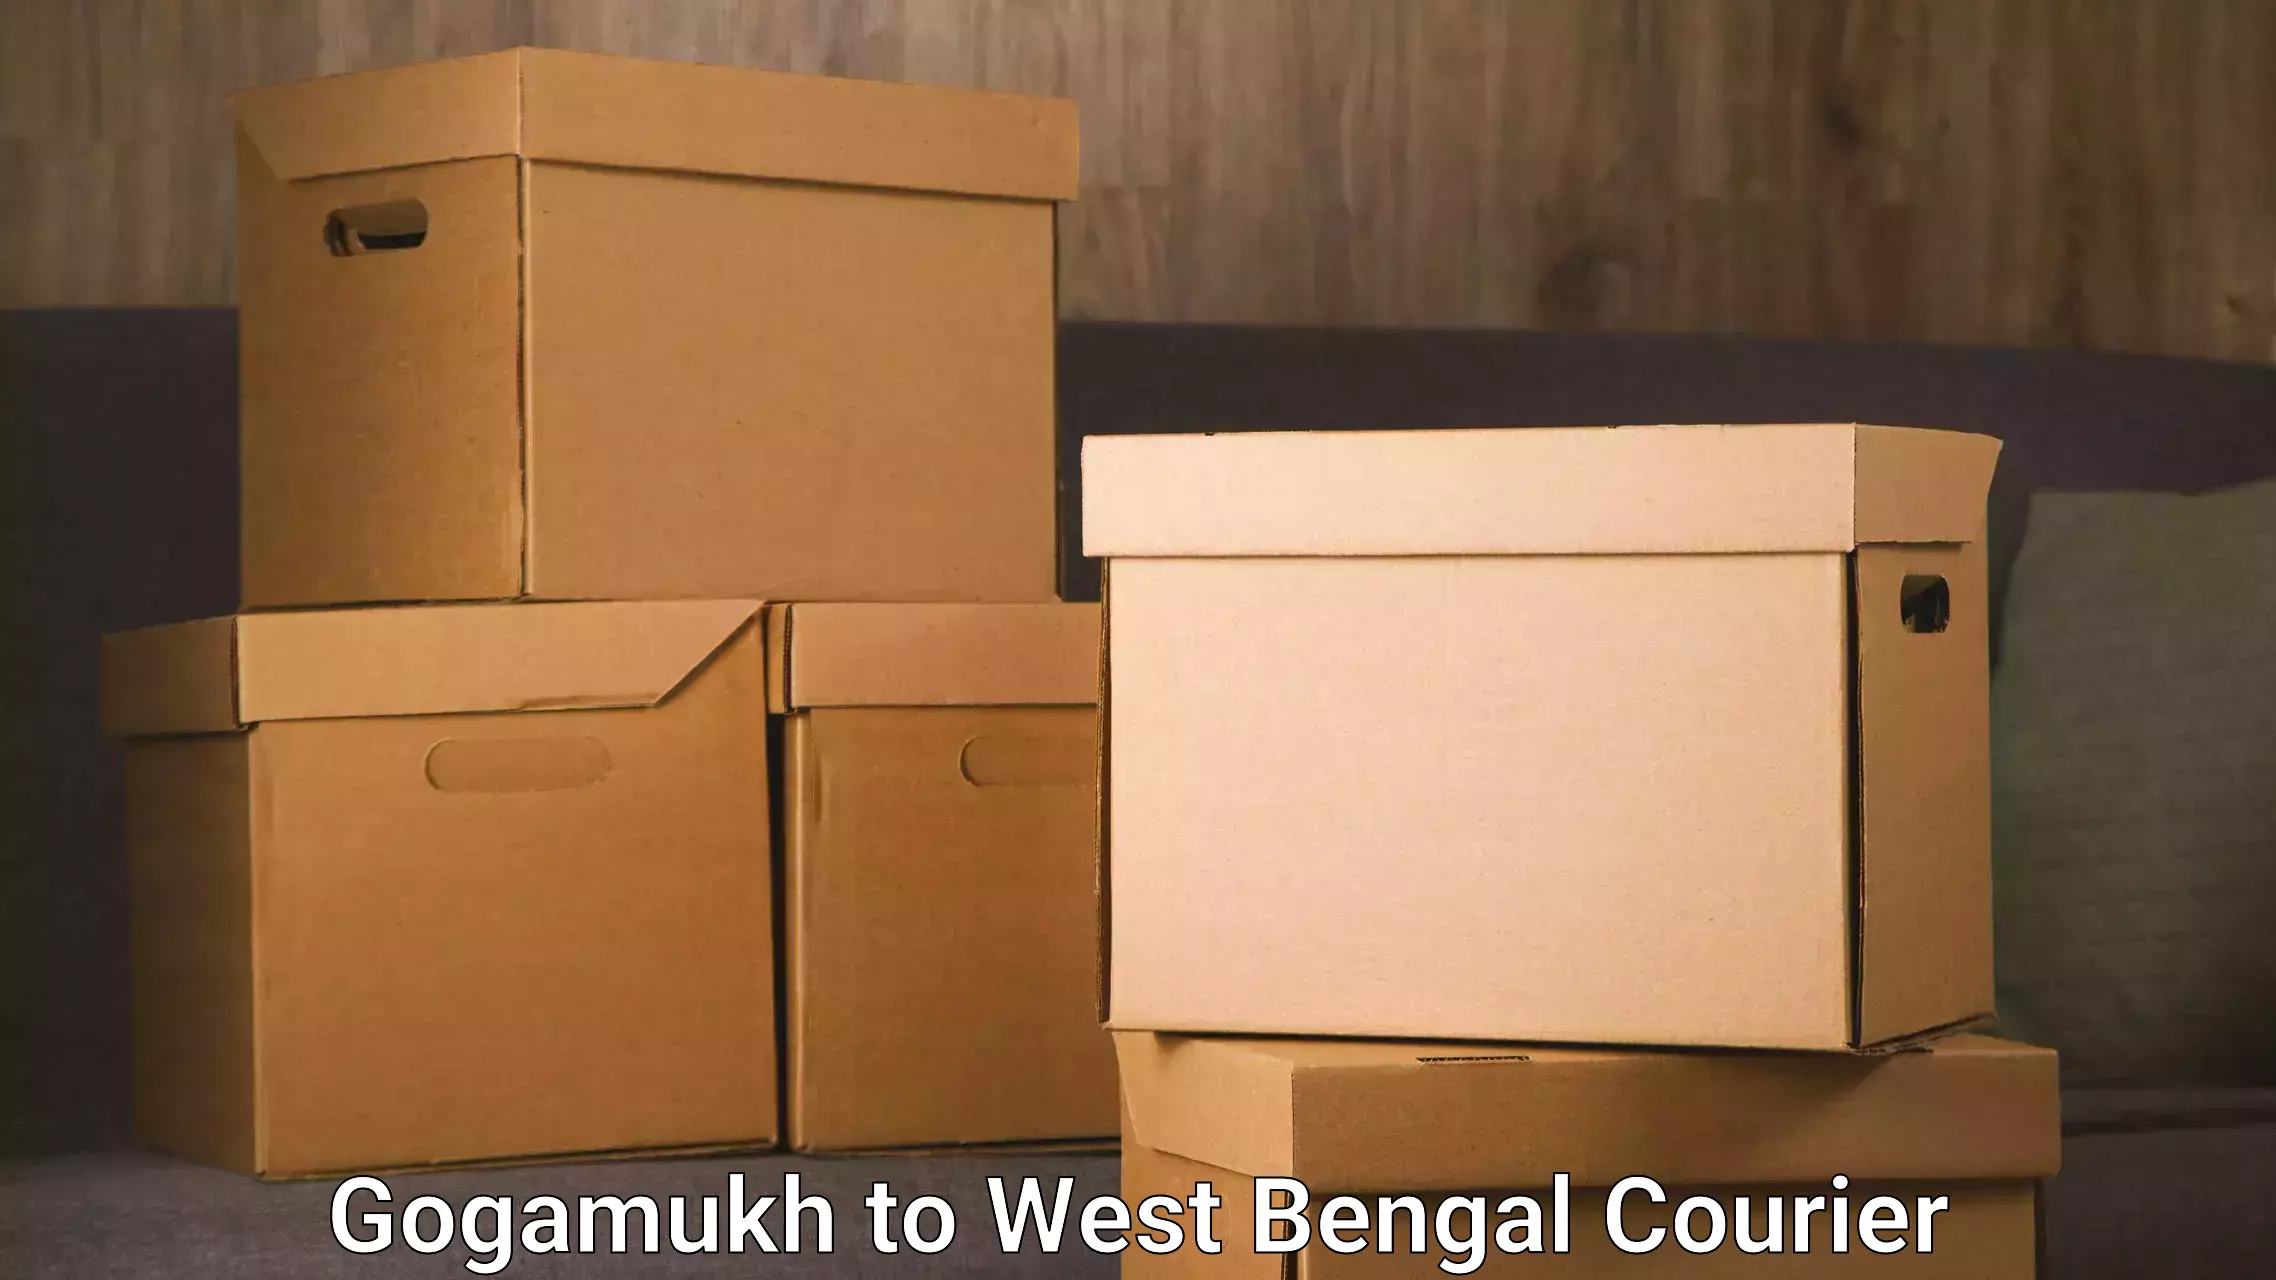 End-to-end delivery in Gogamukh to West Bengal